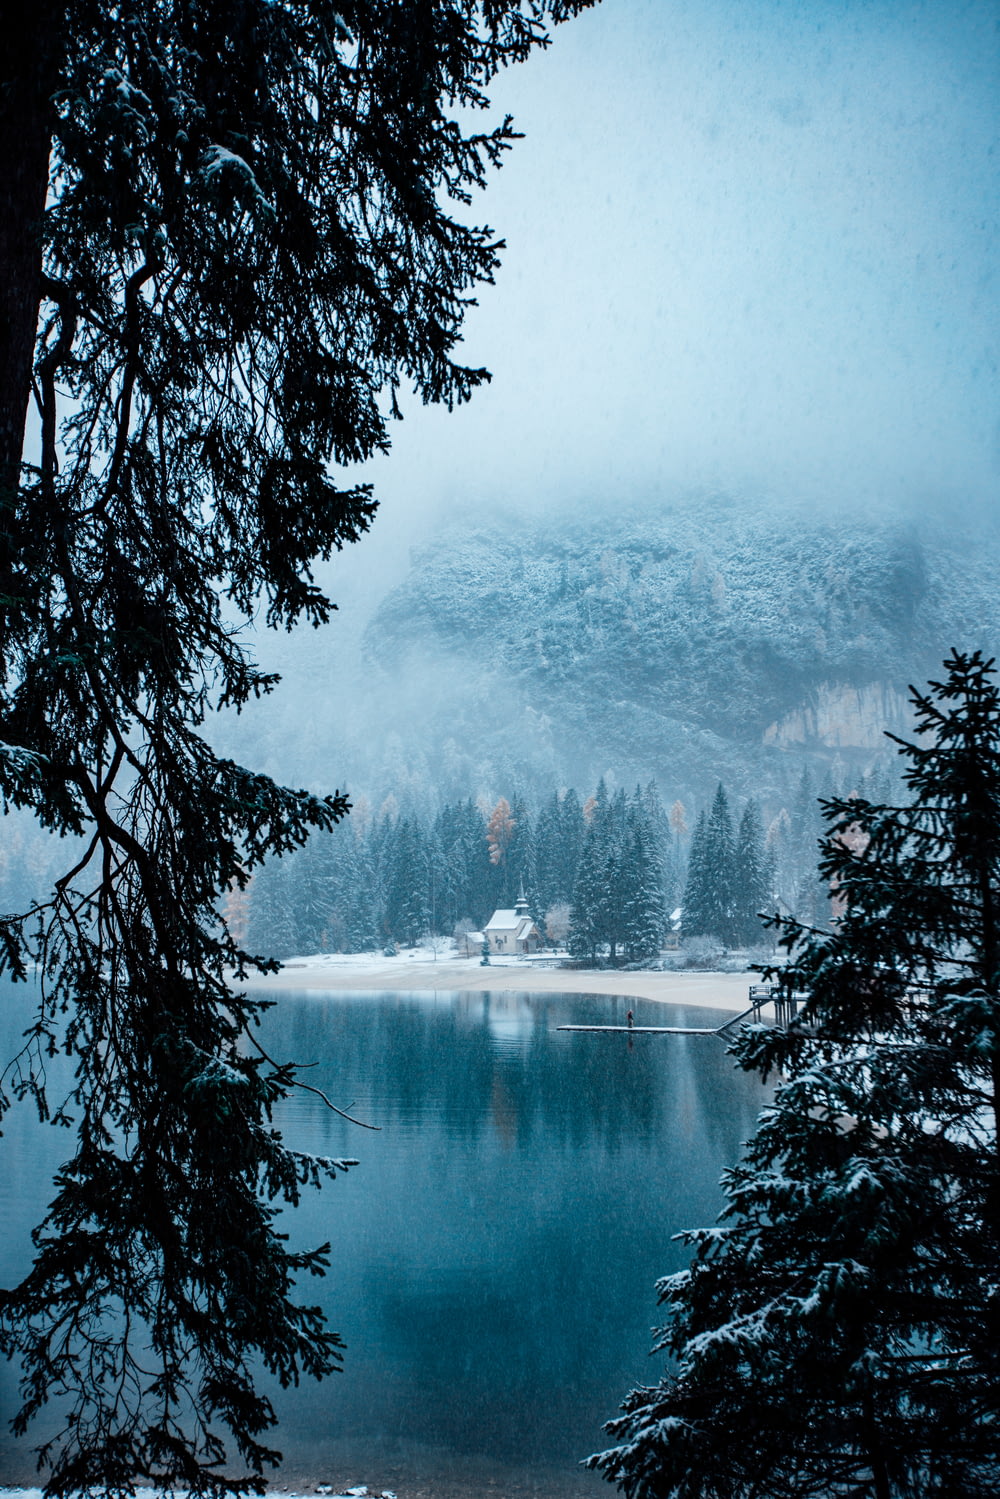 a lake surrounded by pine trees in the snow